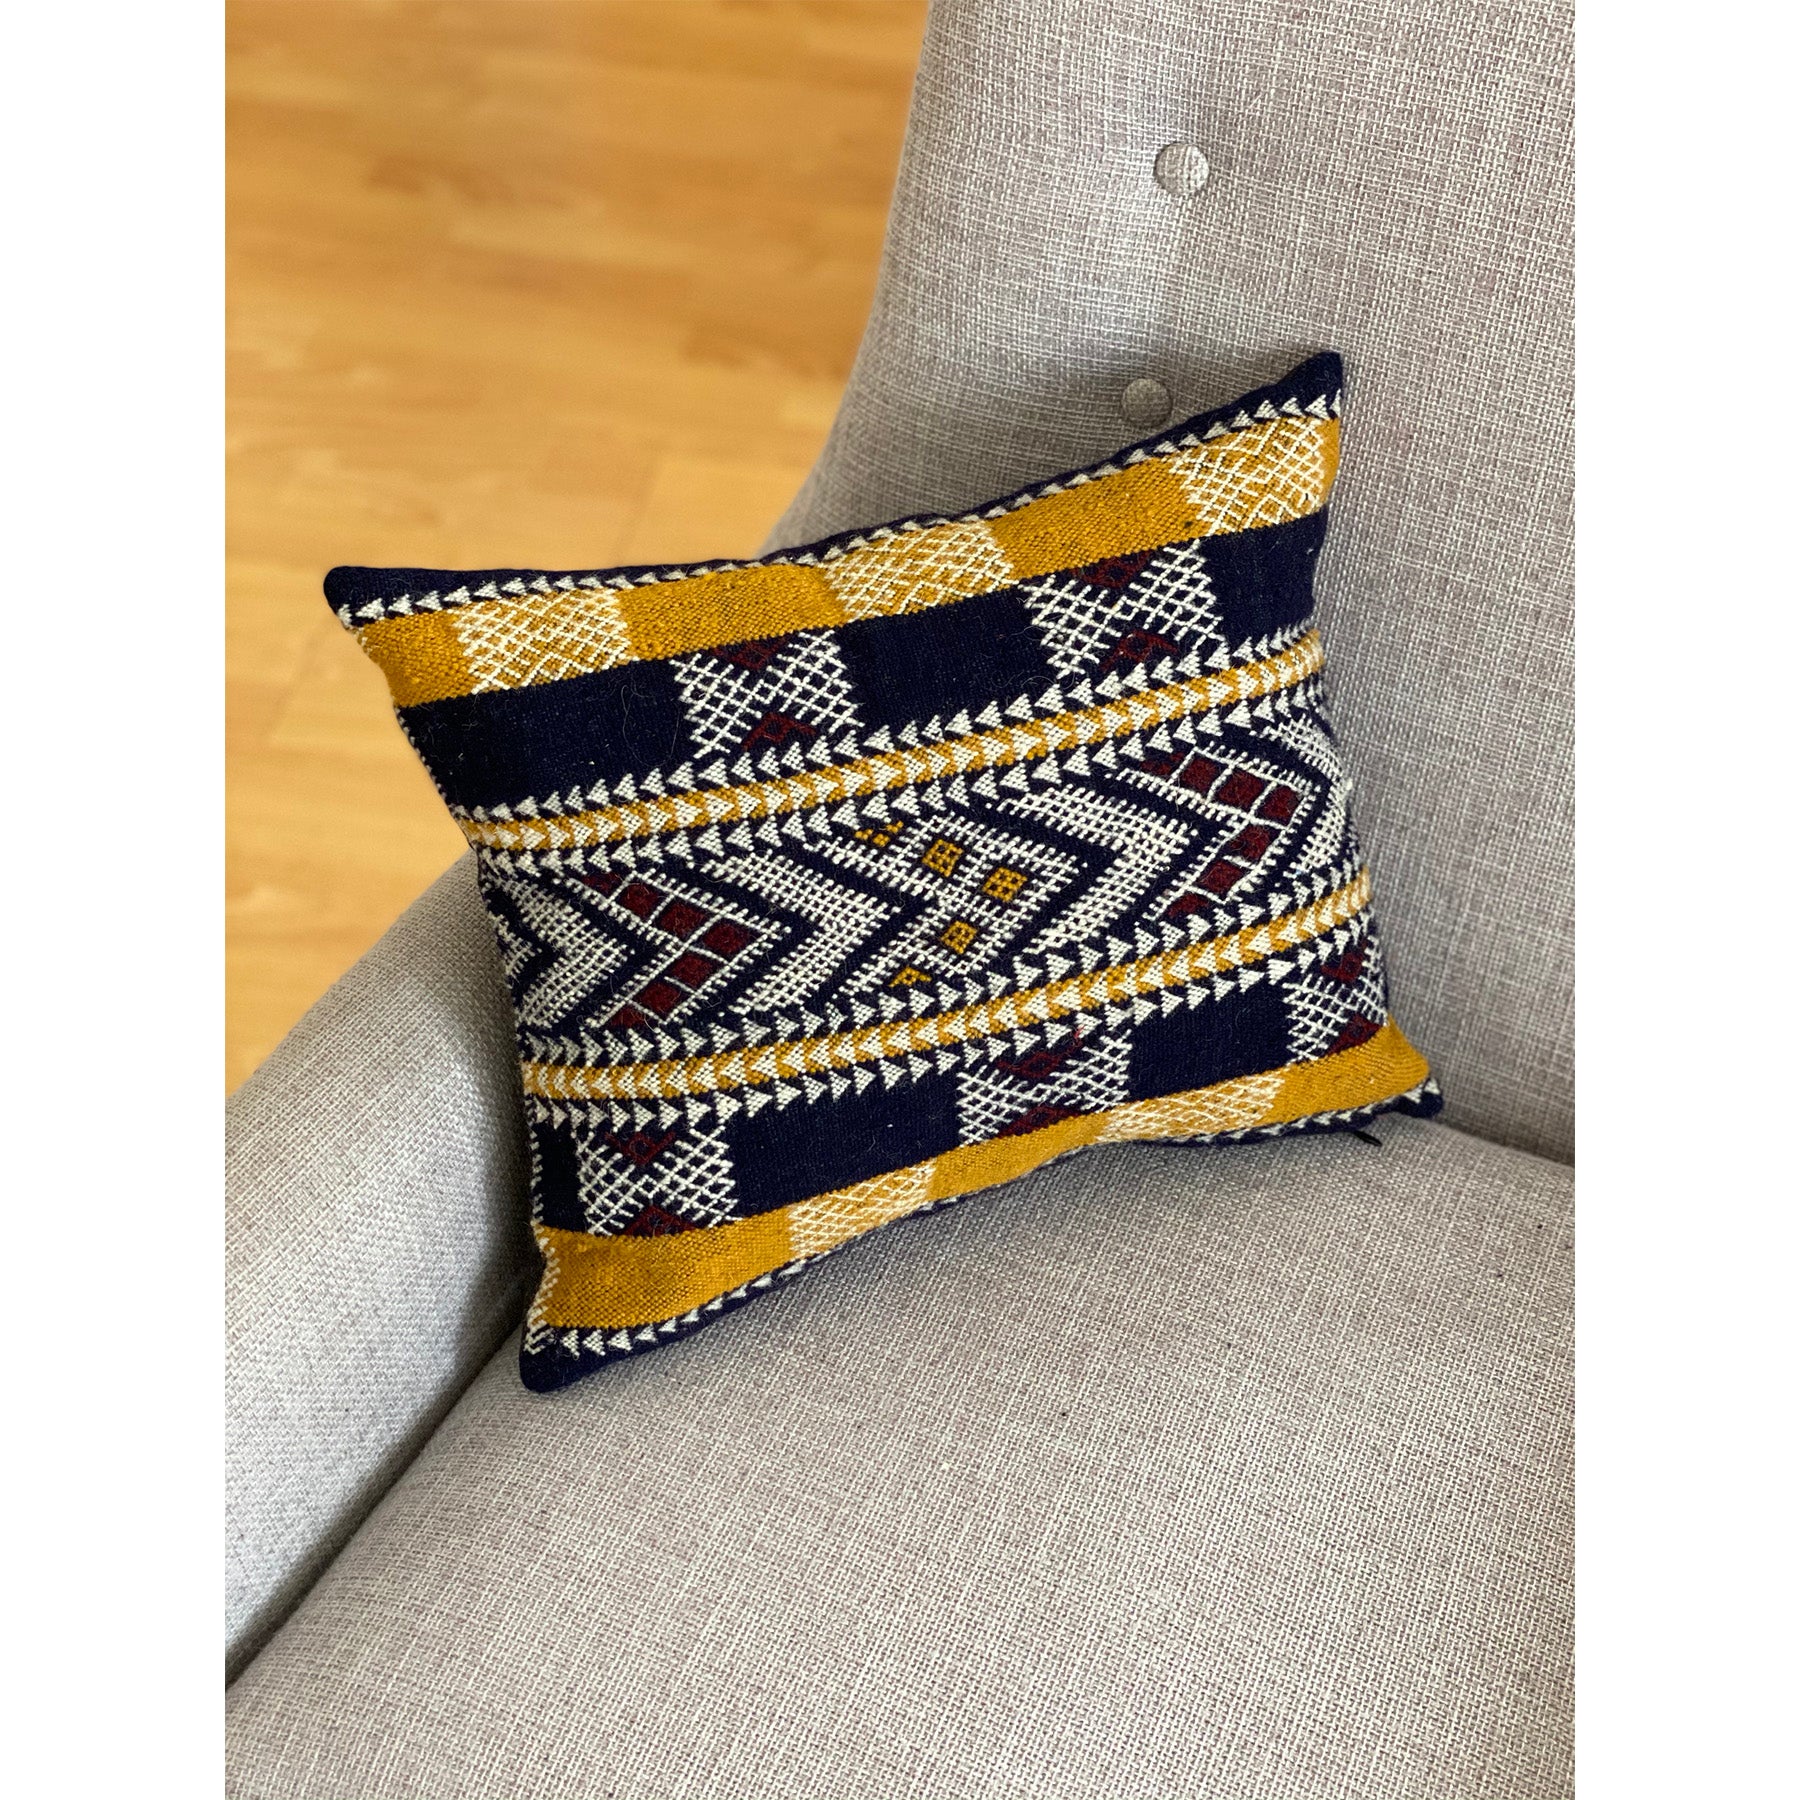 Black and mustard Moroccan pillow made by Kantara weavers in Morocco